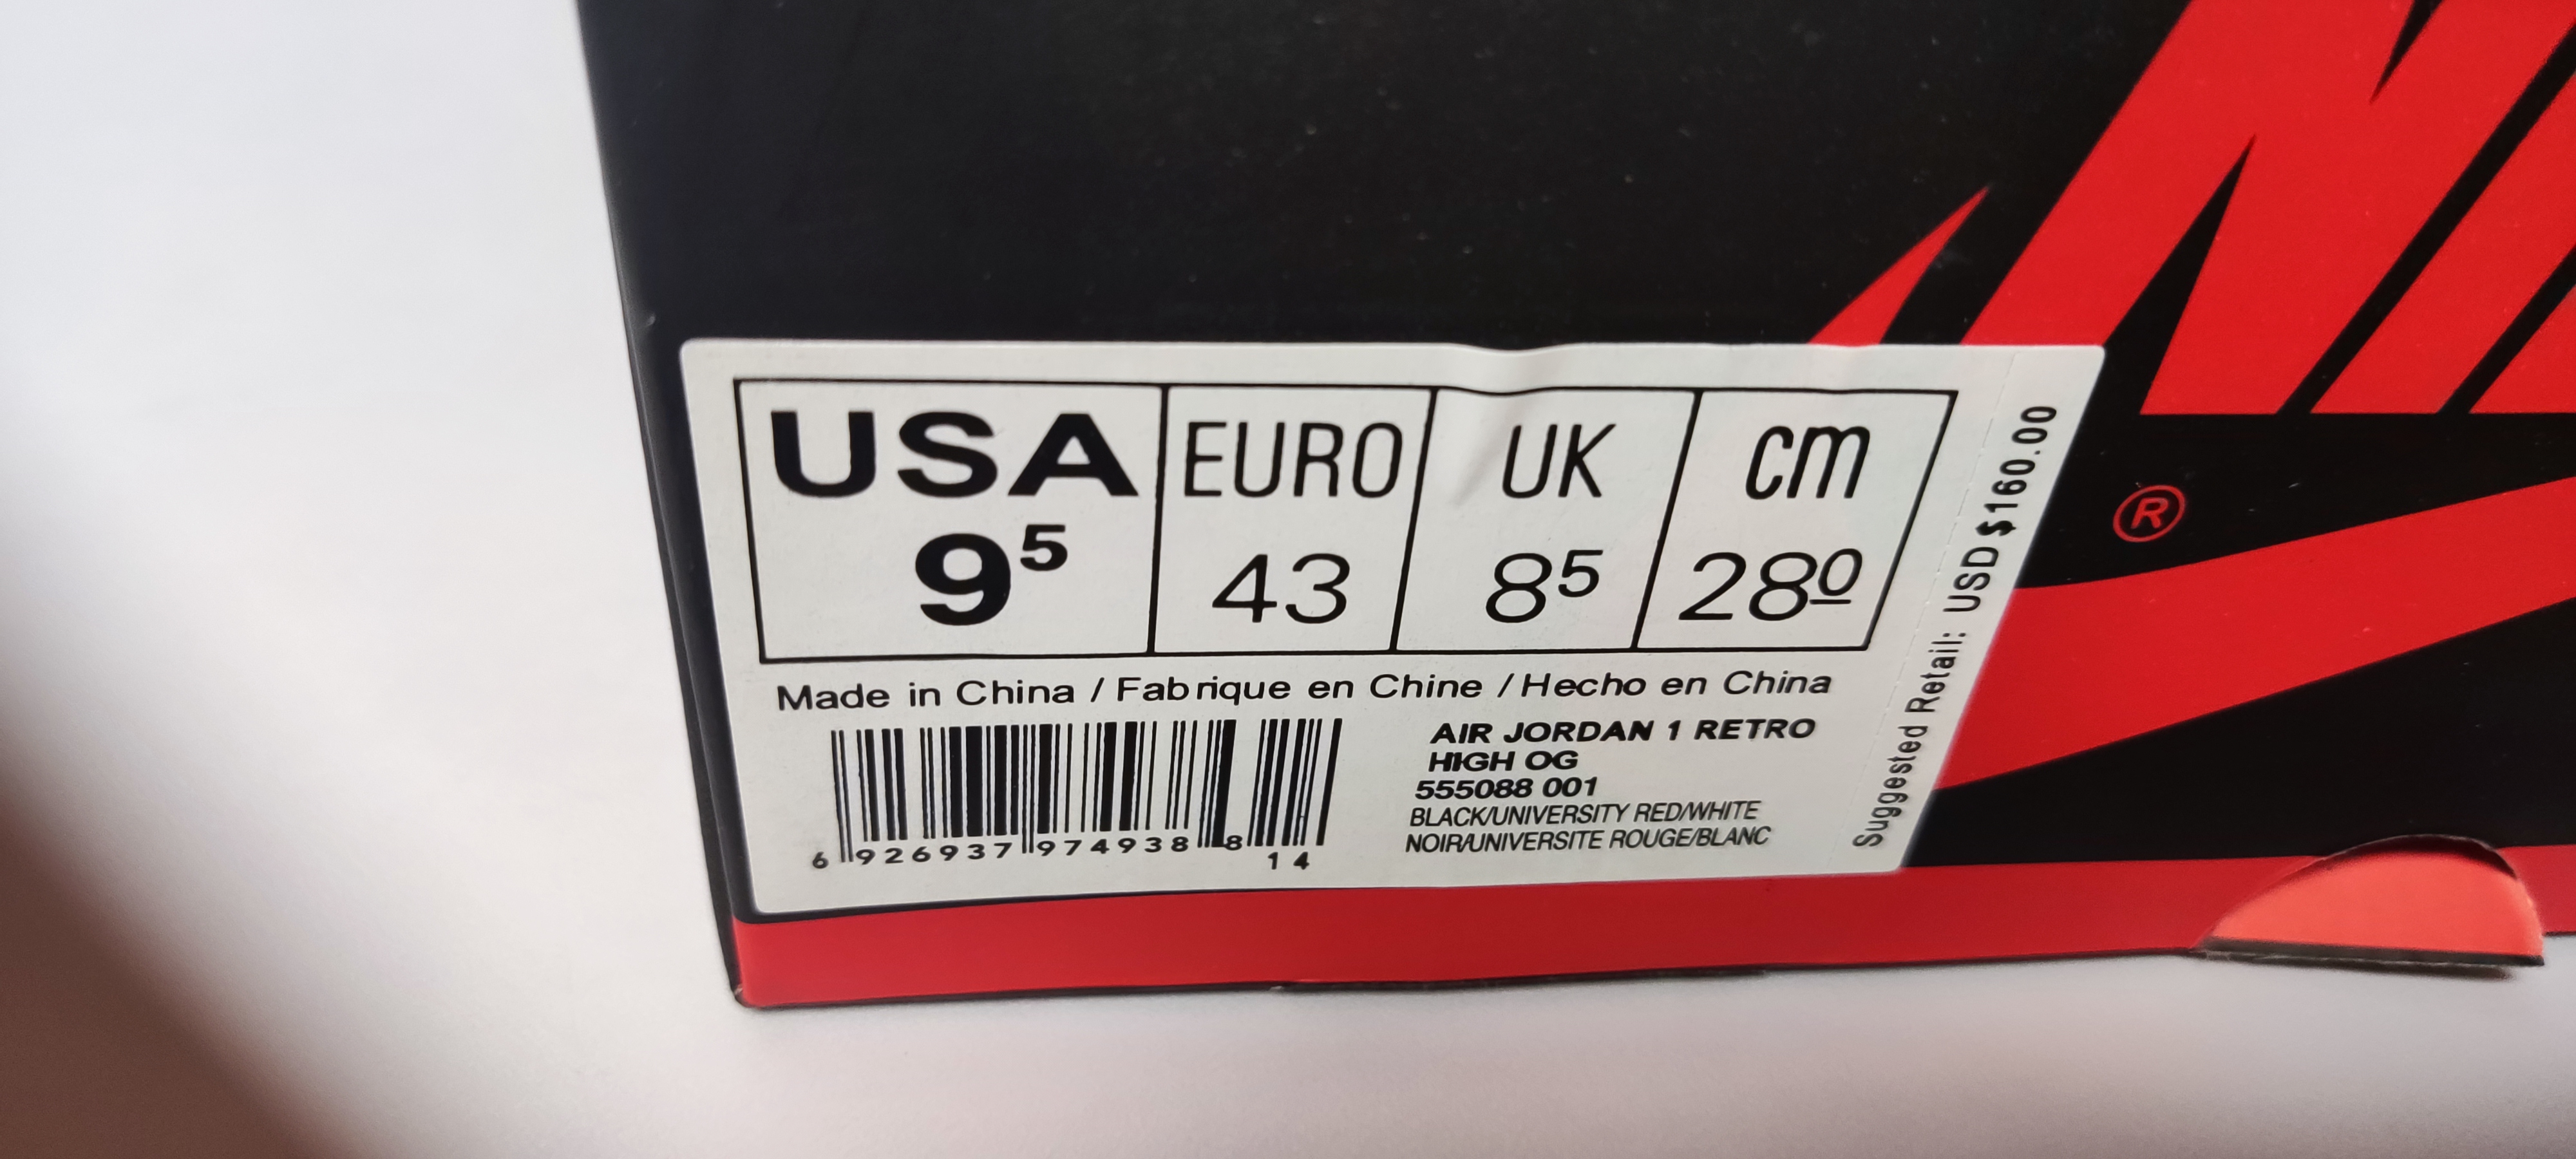 QC Picture Replica Jordan 1 Retro Bred Banned From Jdfoot